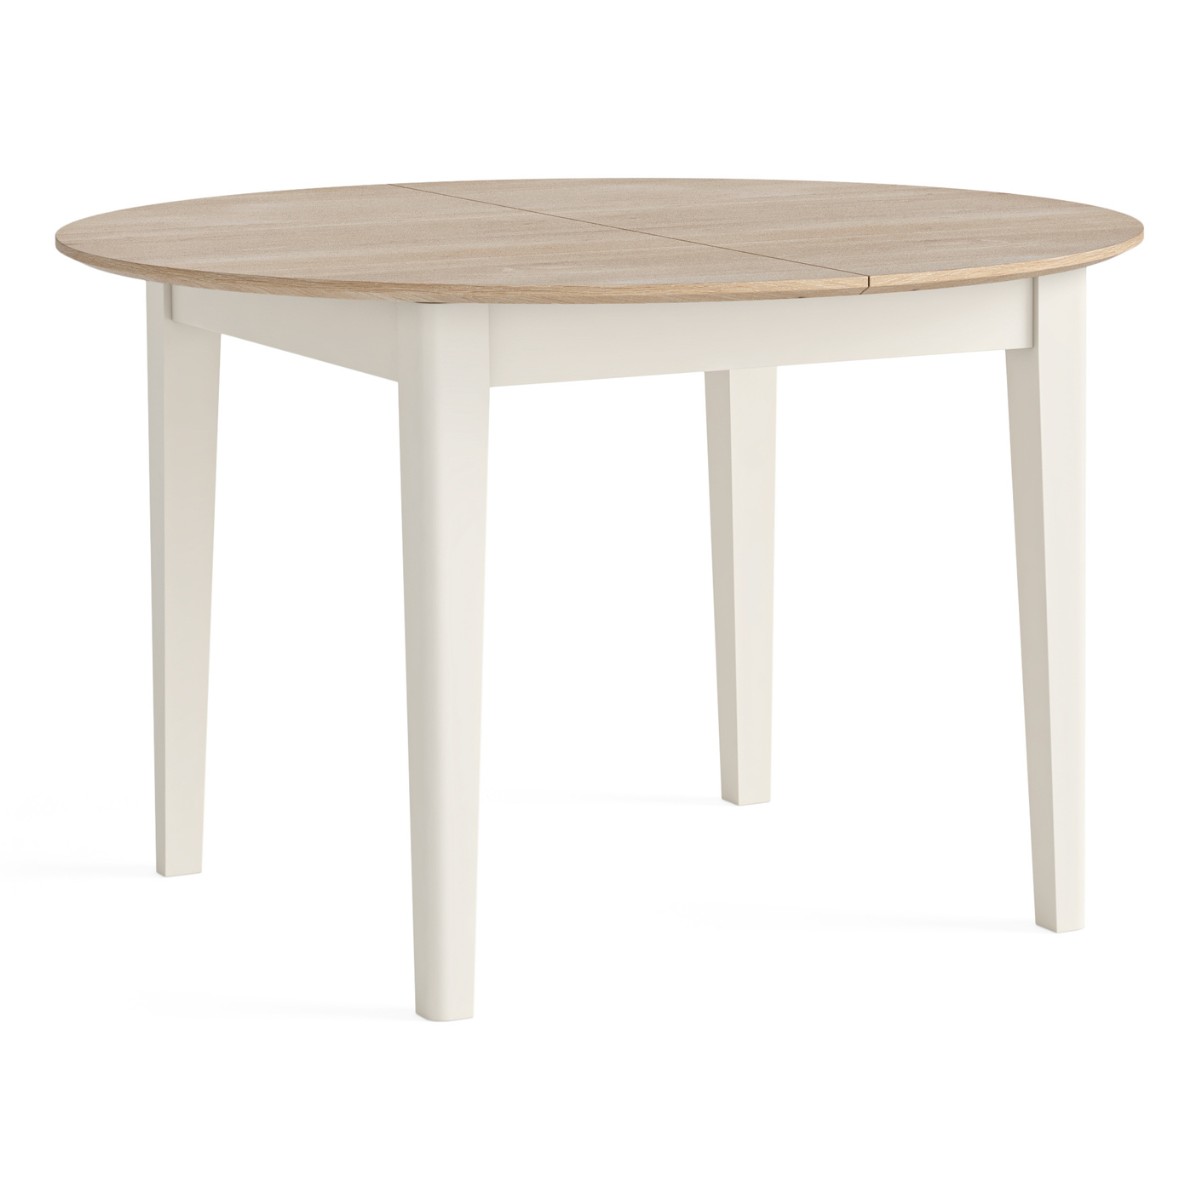 Marcella White Extendable Round Dining Table - 1